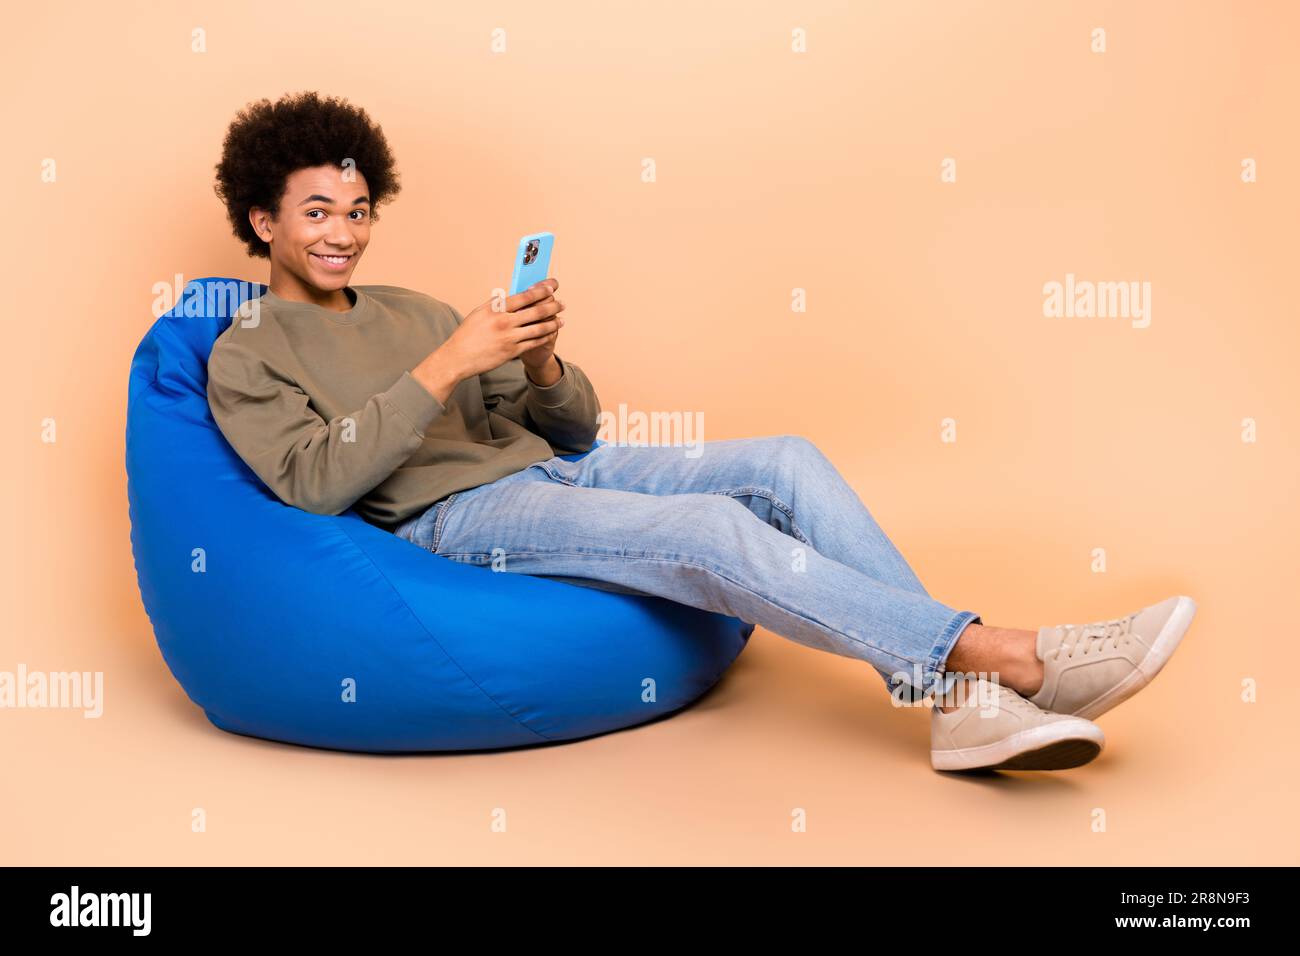 Full body photo of youngster chilling guy browsing instagram reels